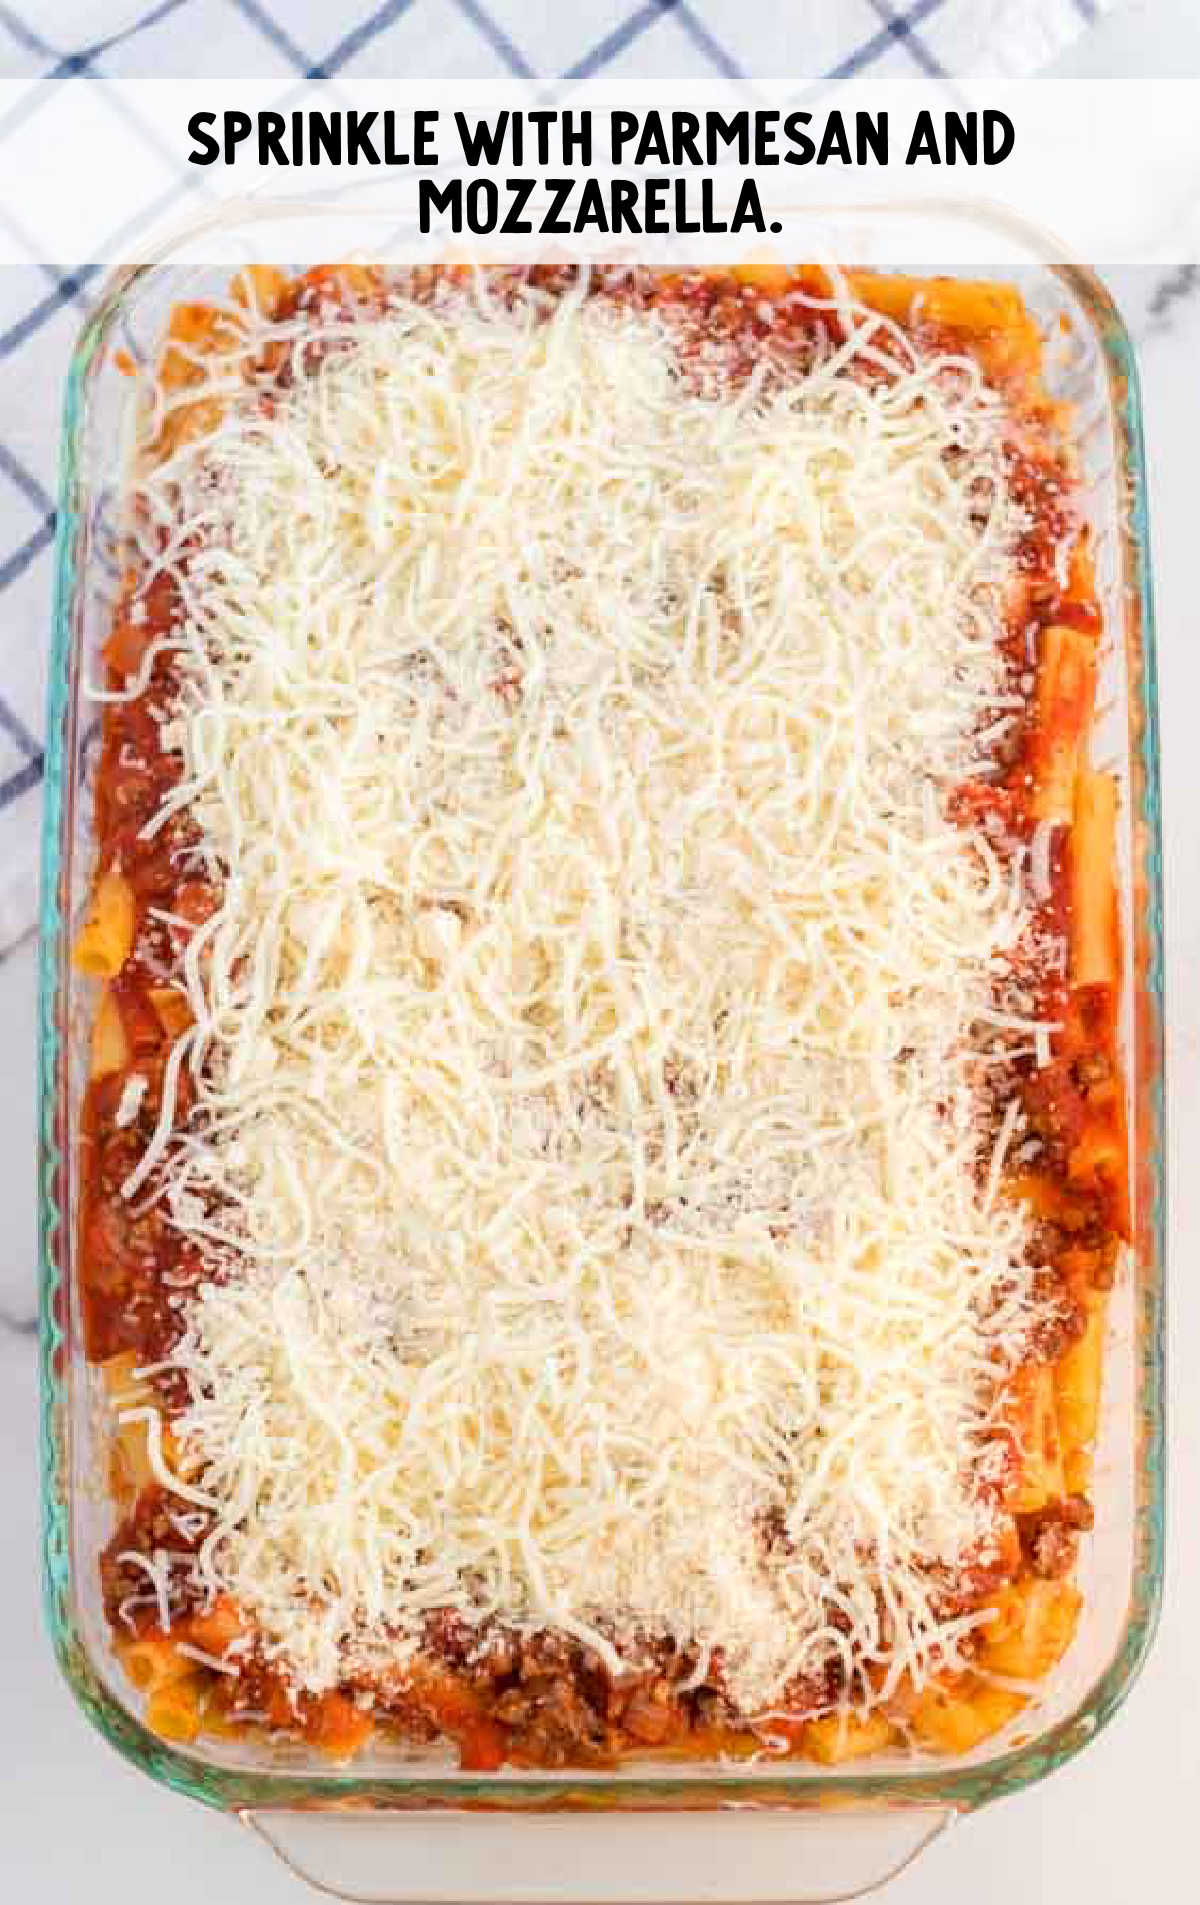 ziti topped with cheeses in the baking dish